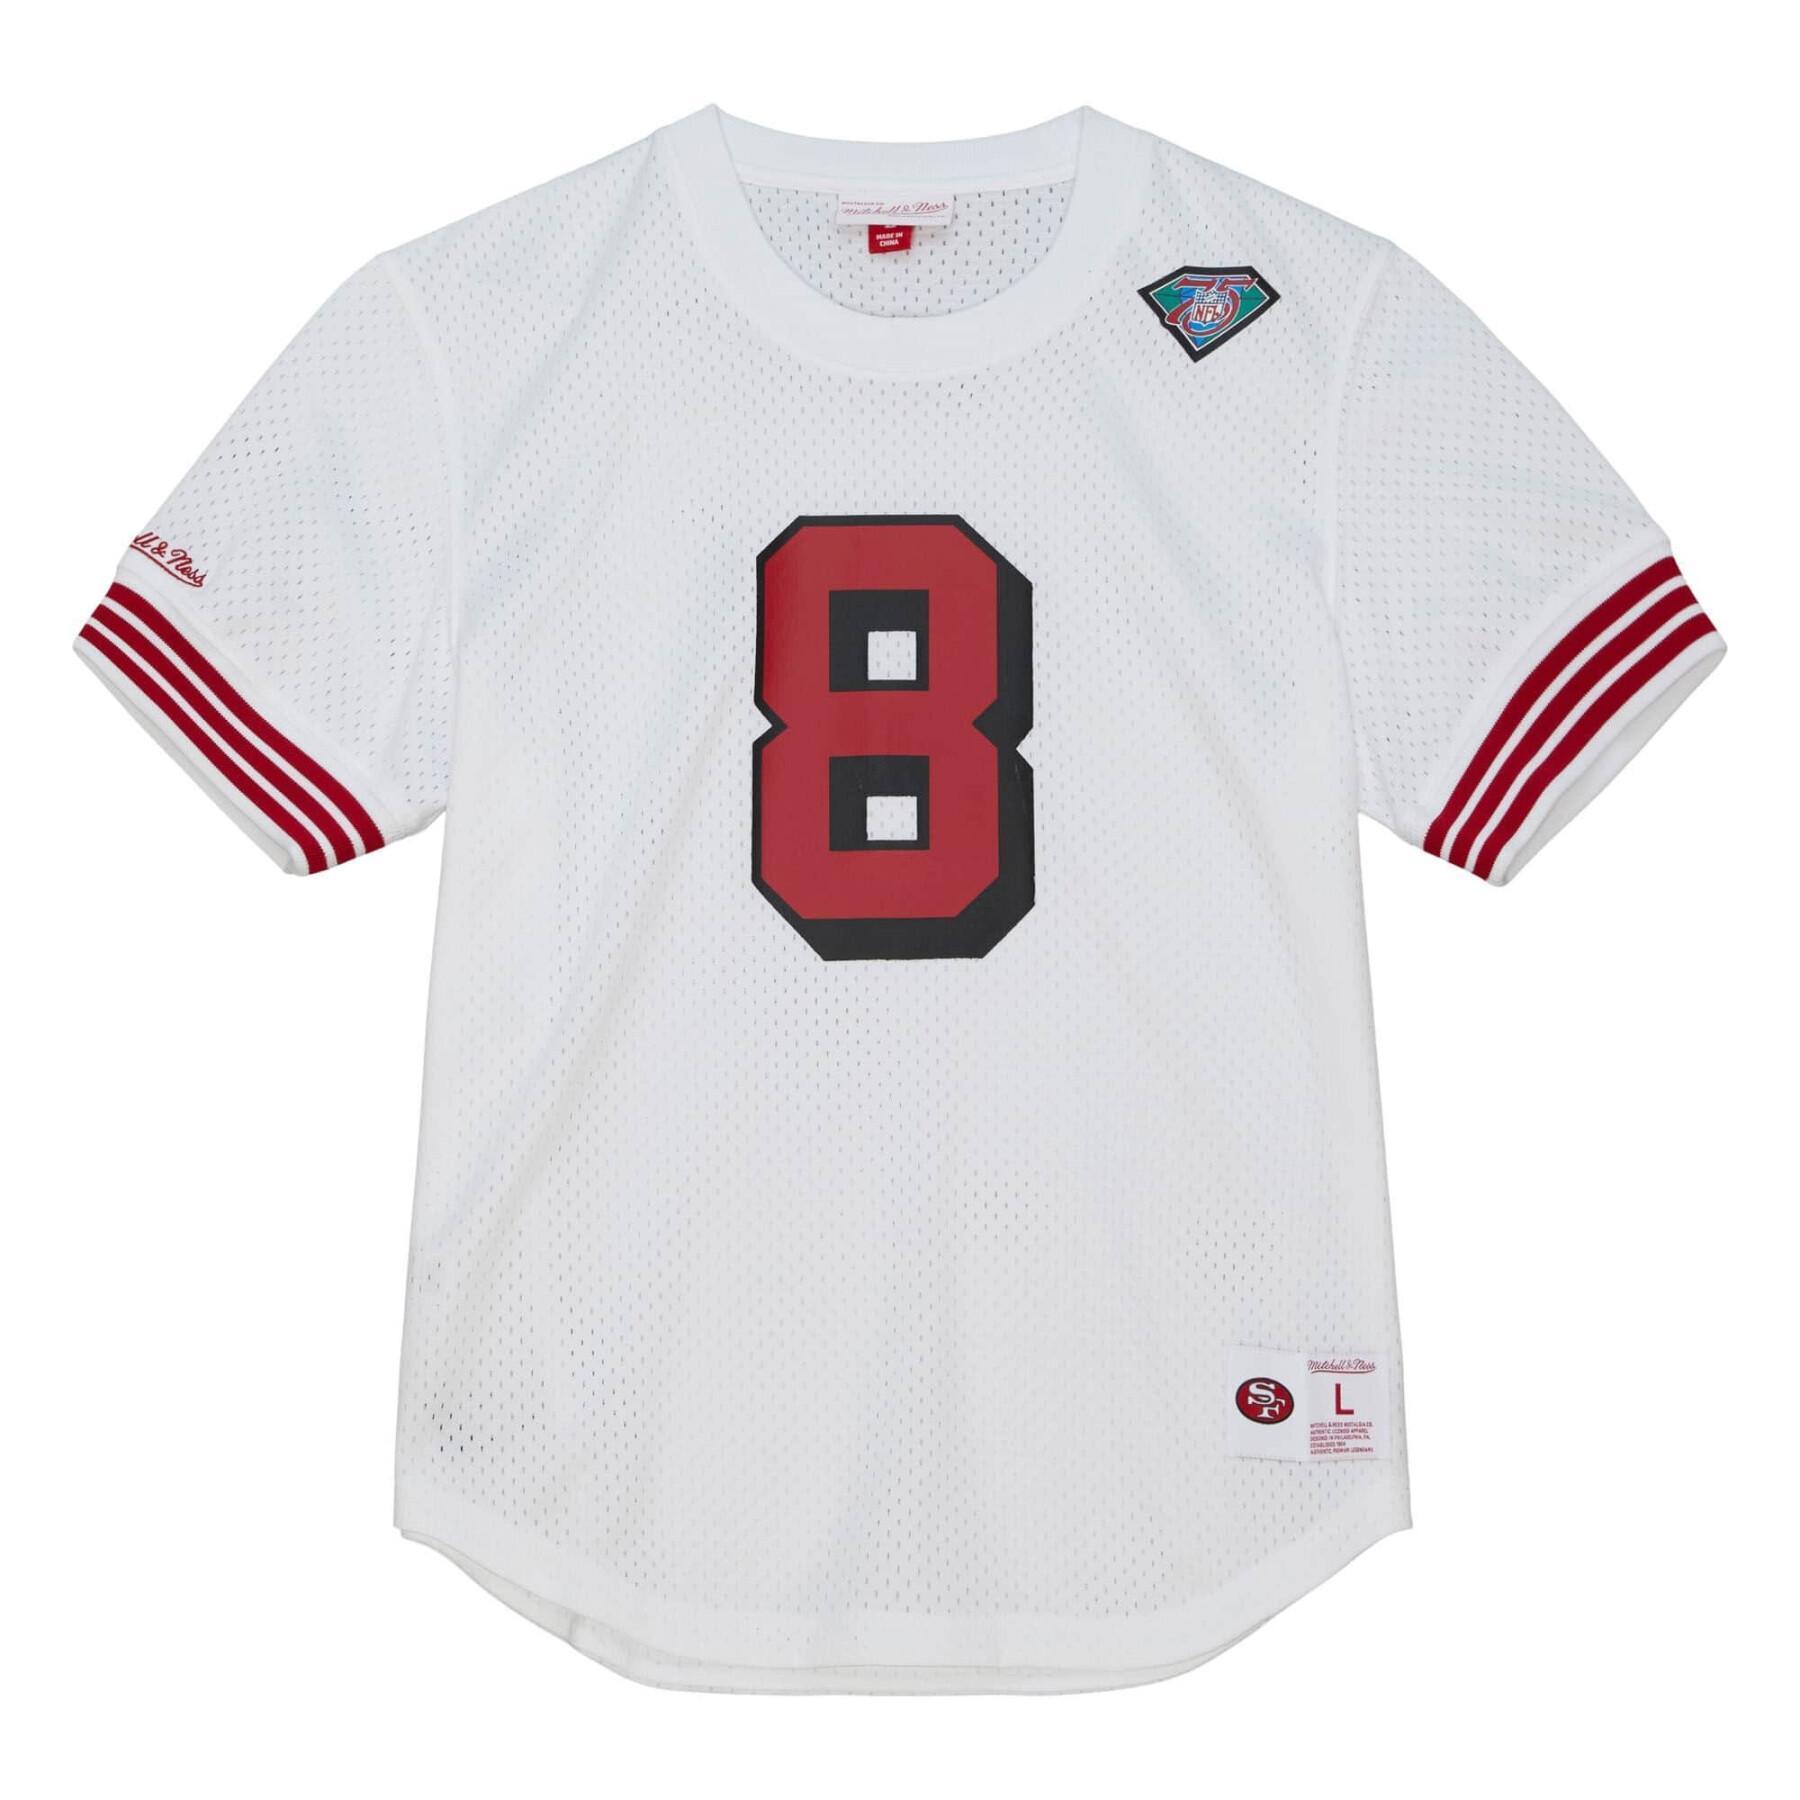 sean taylor mitchell and ness jersey